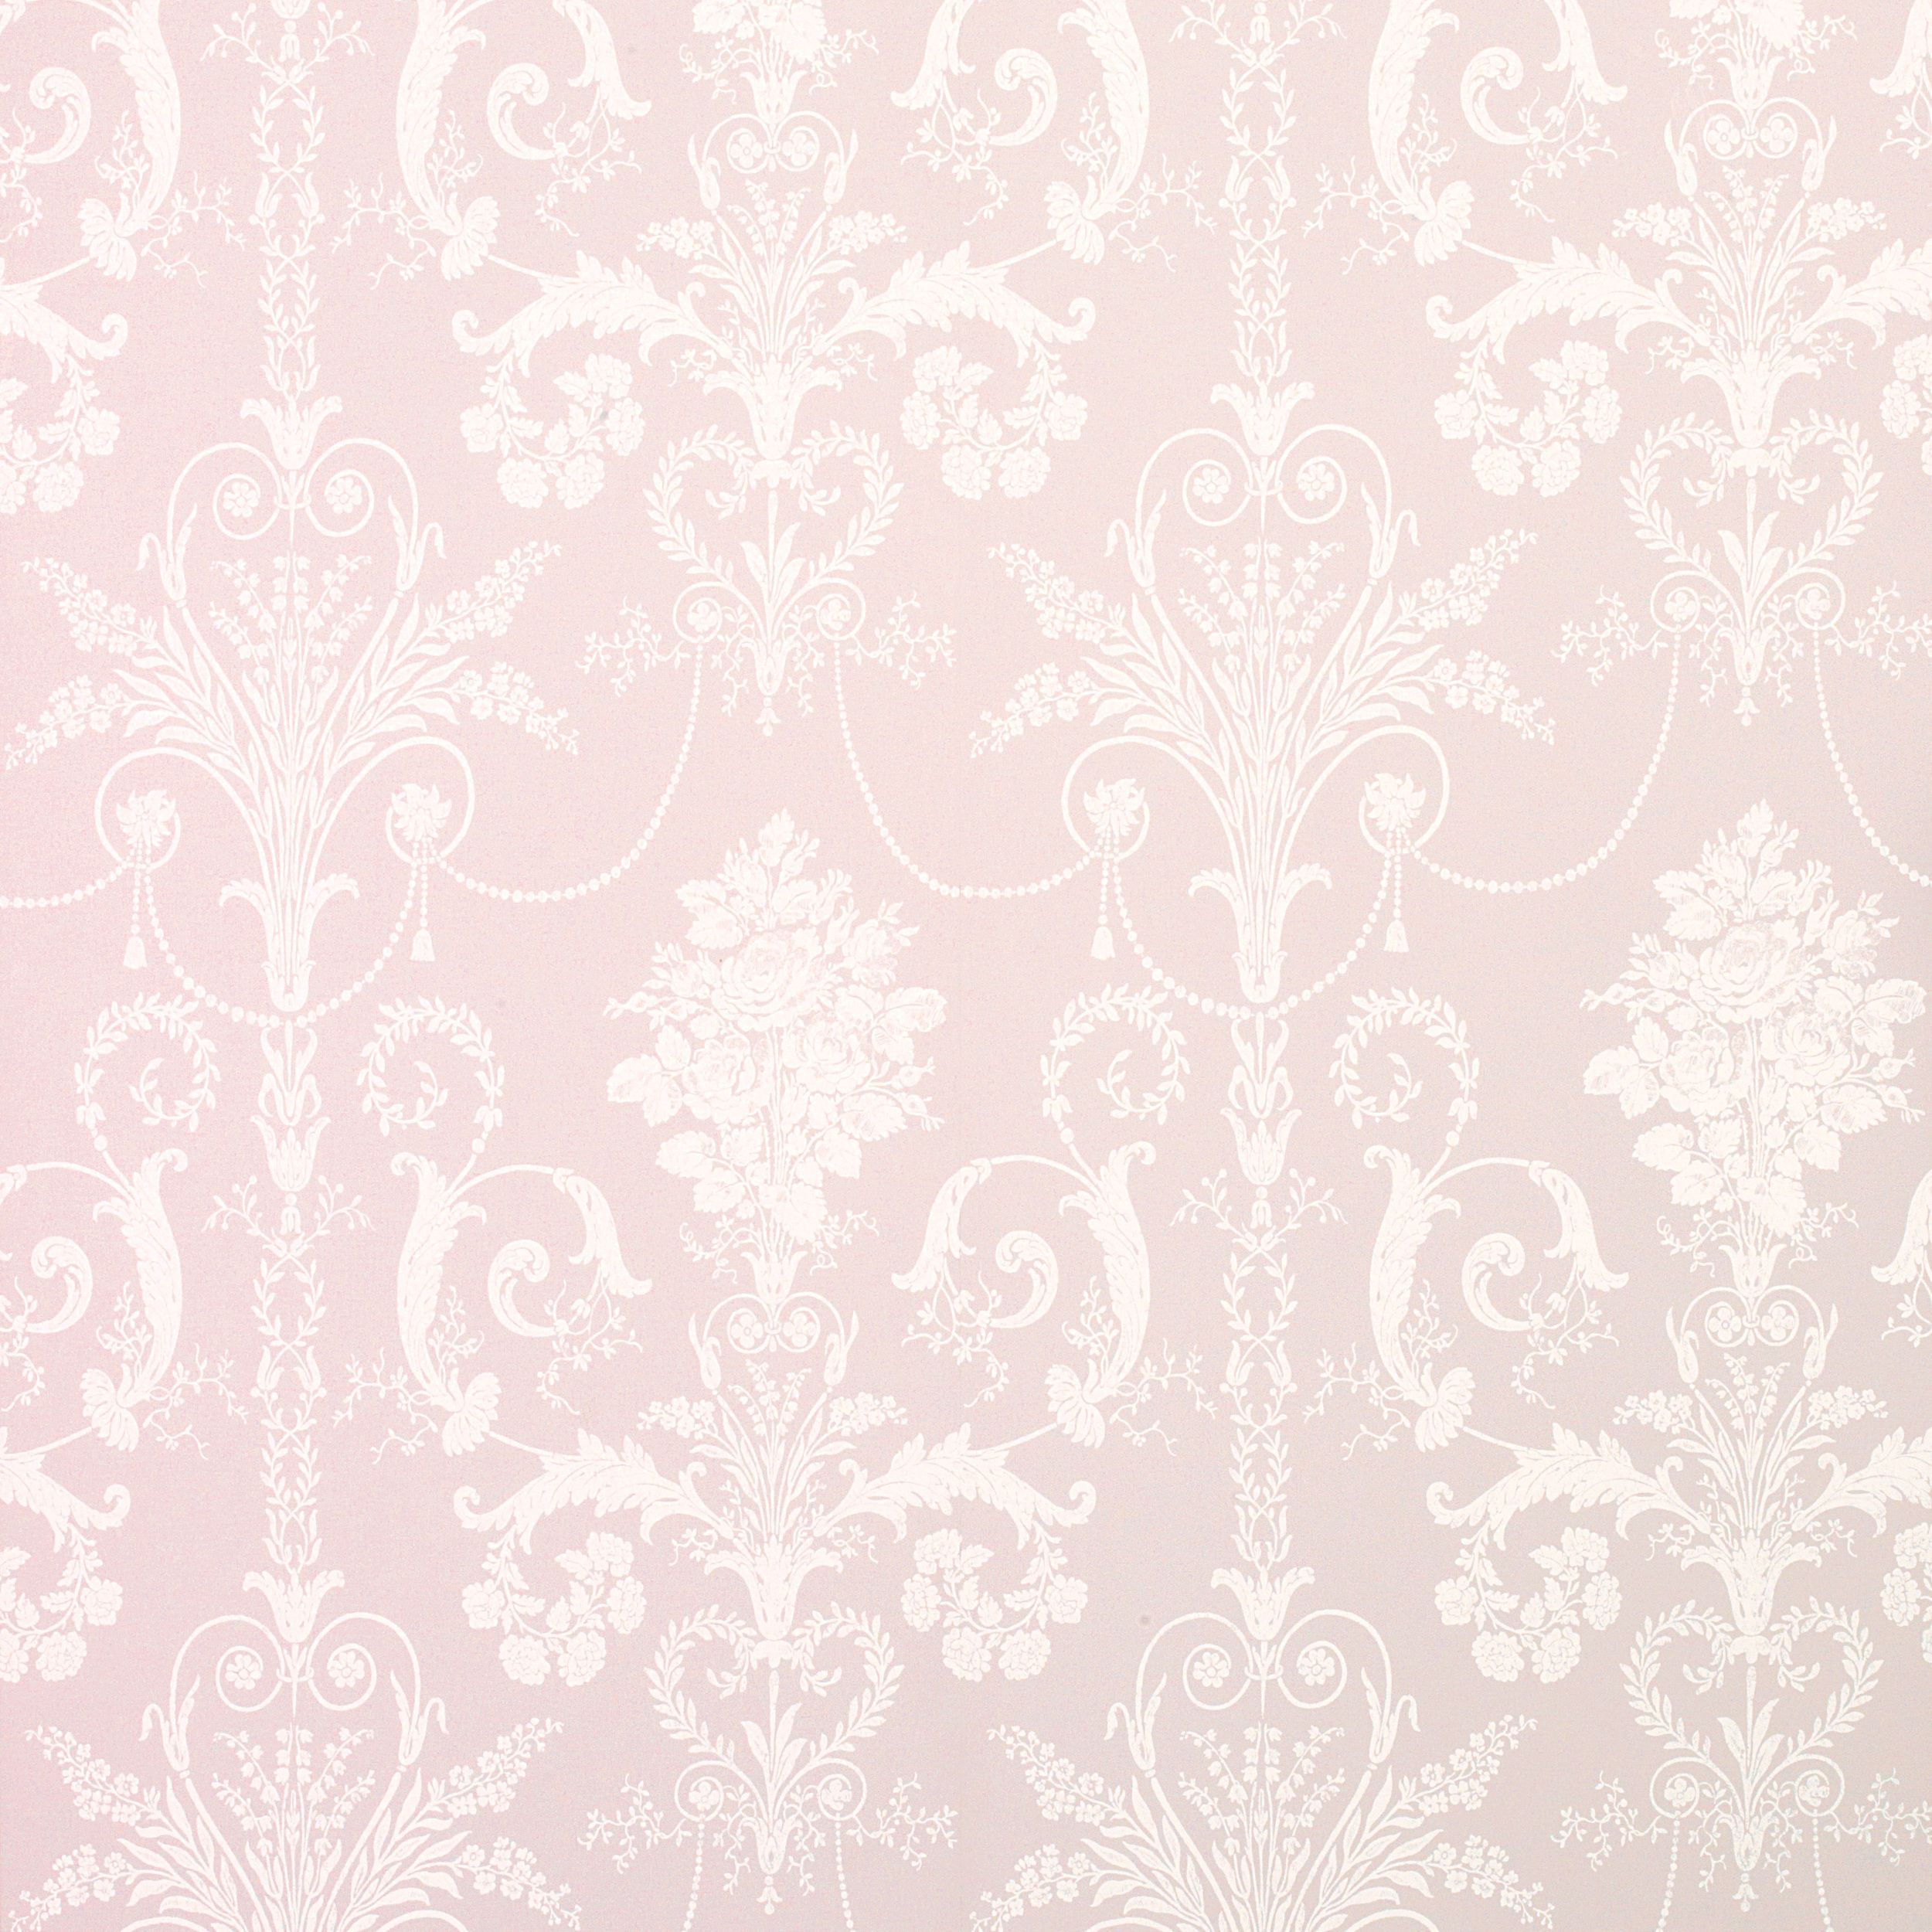 Josette wallpaper in amethyst pink with white Rococo damask